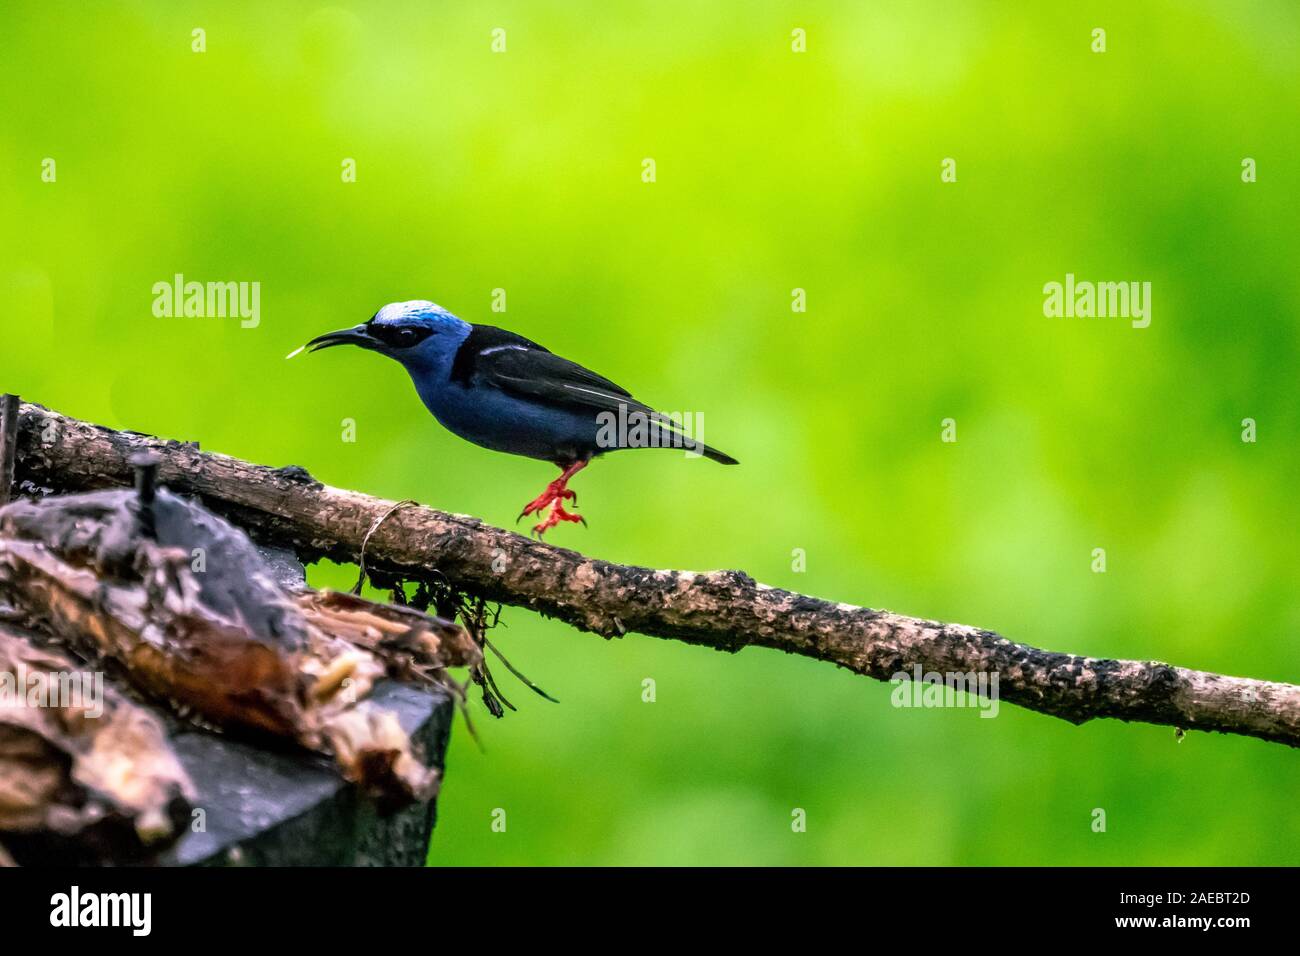 Red-legged honeycreeper (Cyanerpes cyaneus) male. This small songbird is found in the tropics from southern Mexico to northern South America. It is fo Stock Photo